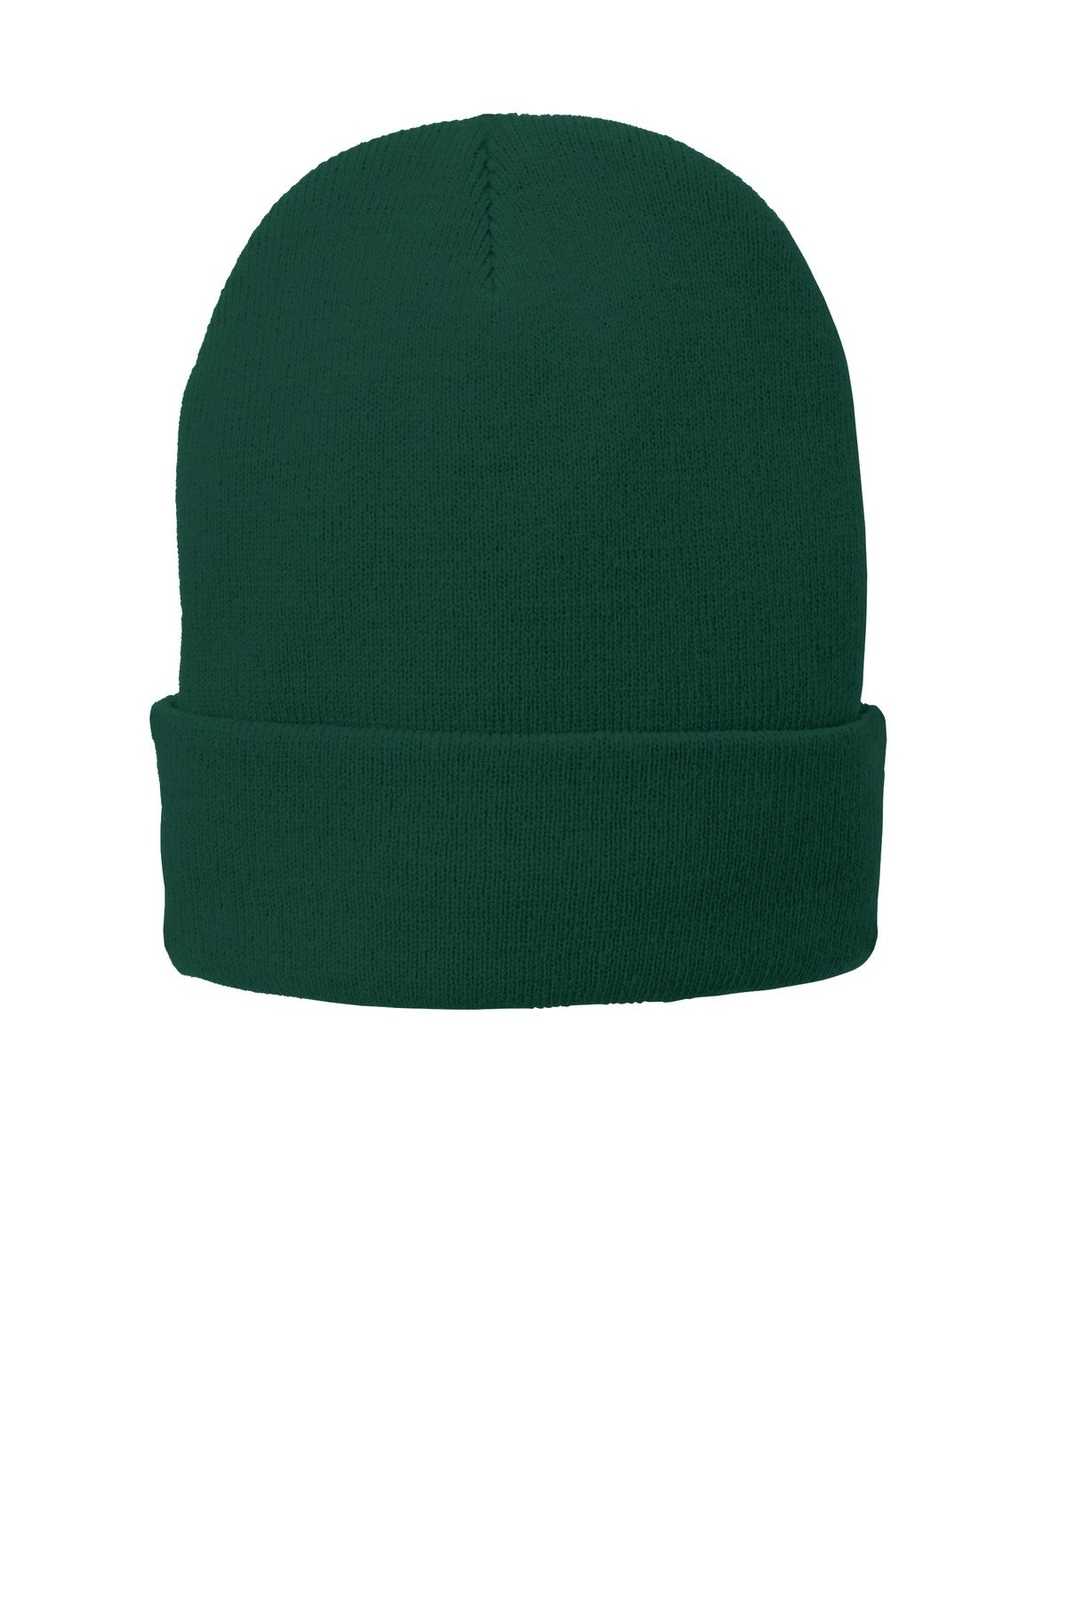 Port &amp; Company CP90L Fleece-Lined Knit Cap with Cuff - Athletic Green - HIT a Double - 1